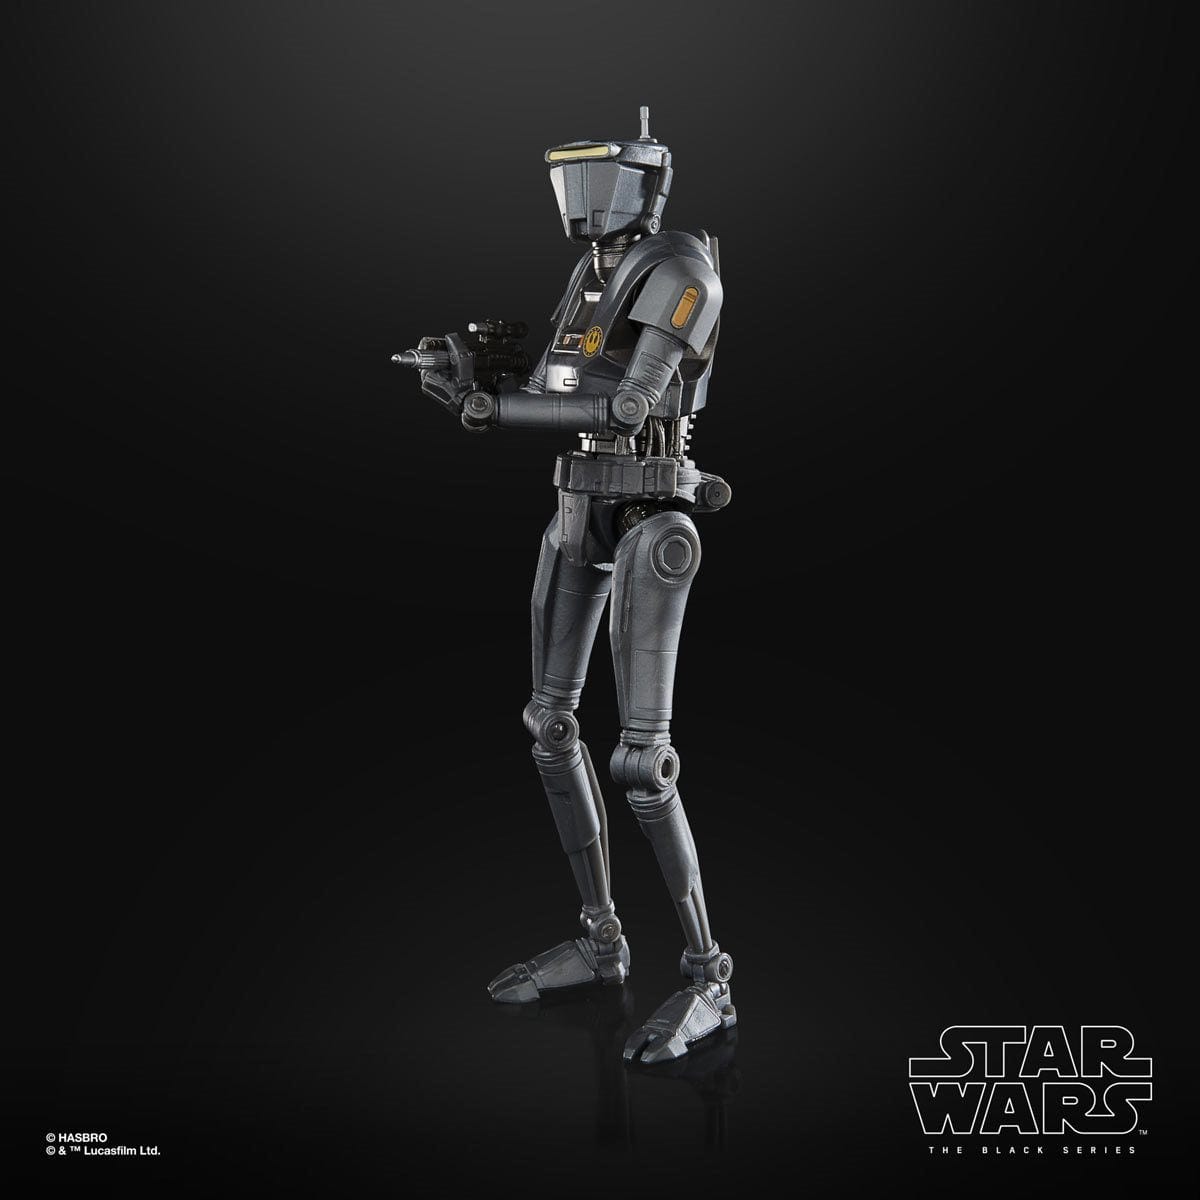 Star Wars The Black Series New Republic Security Droid 6-Inch Action Figure Pop-O-Loco